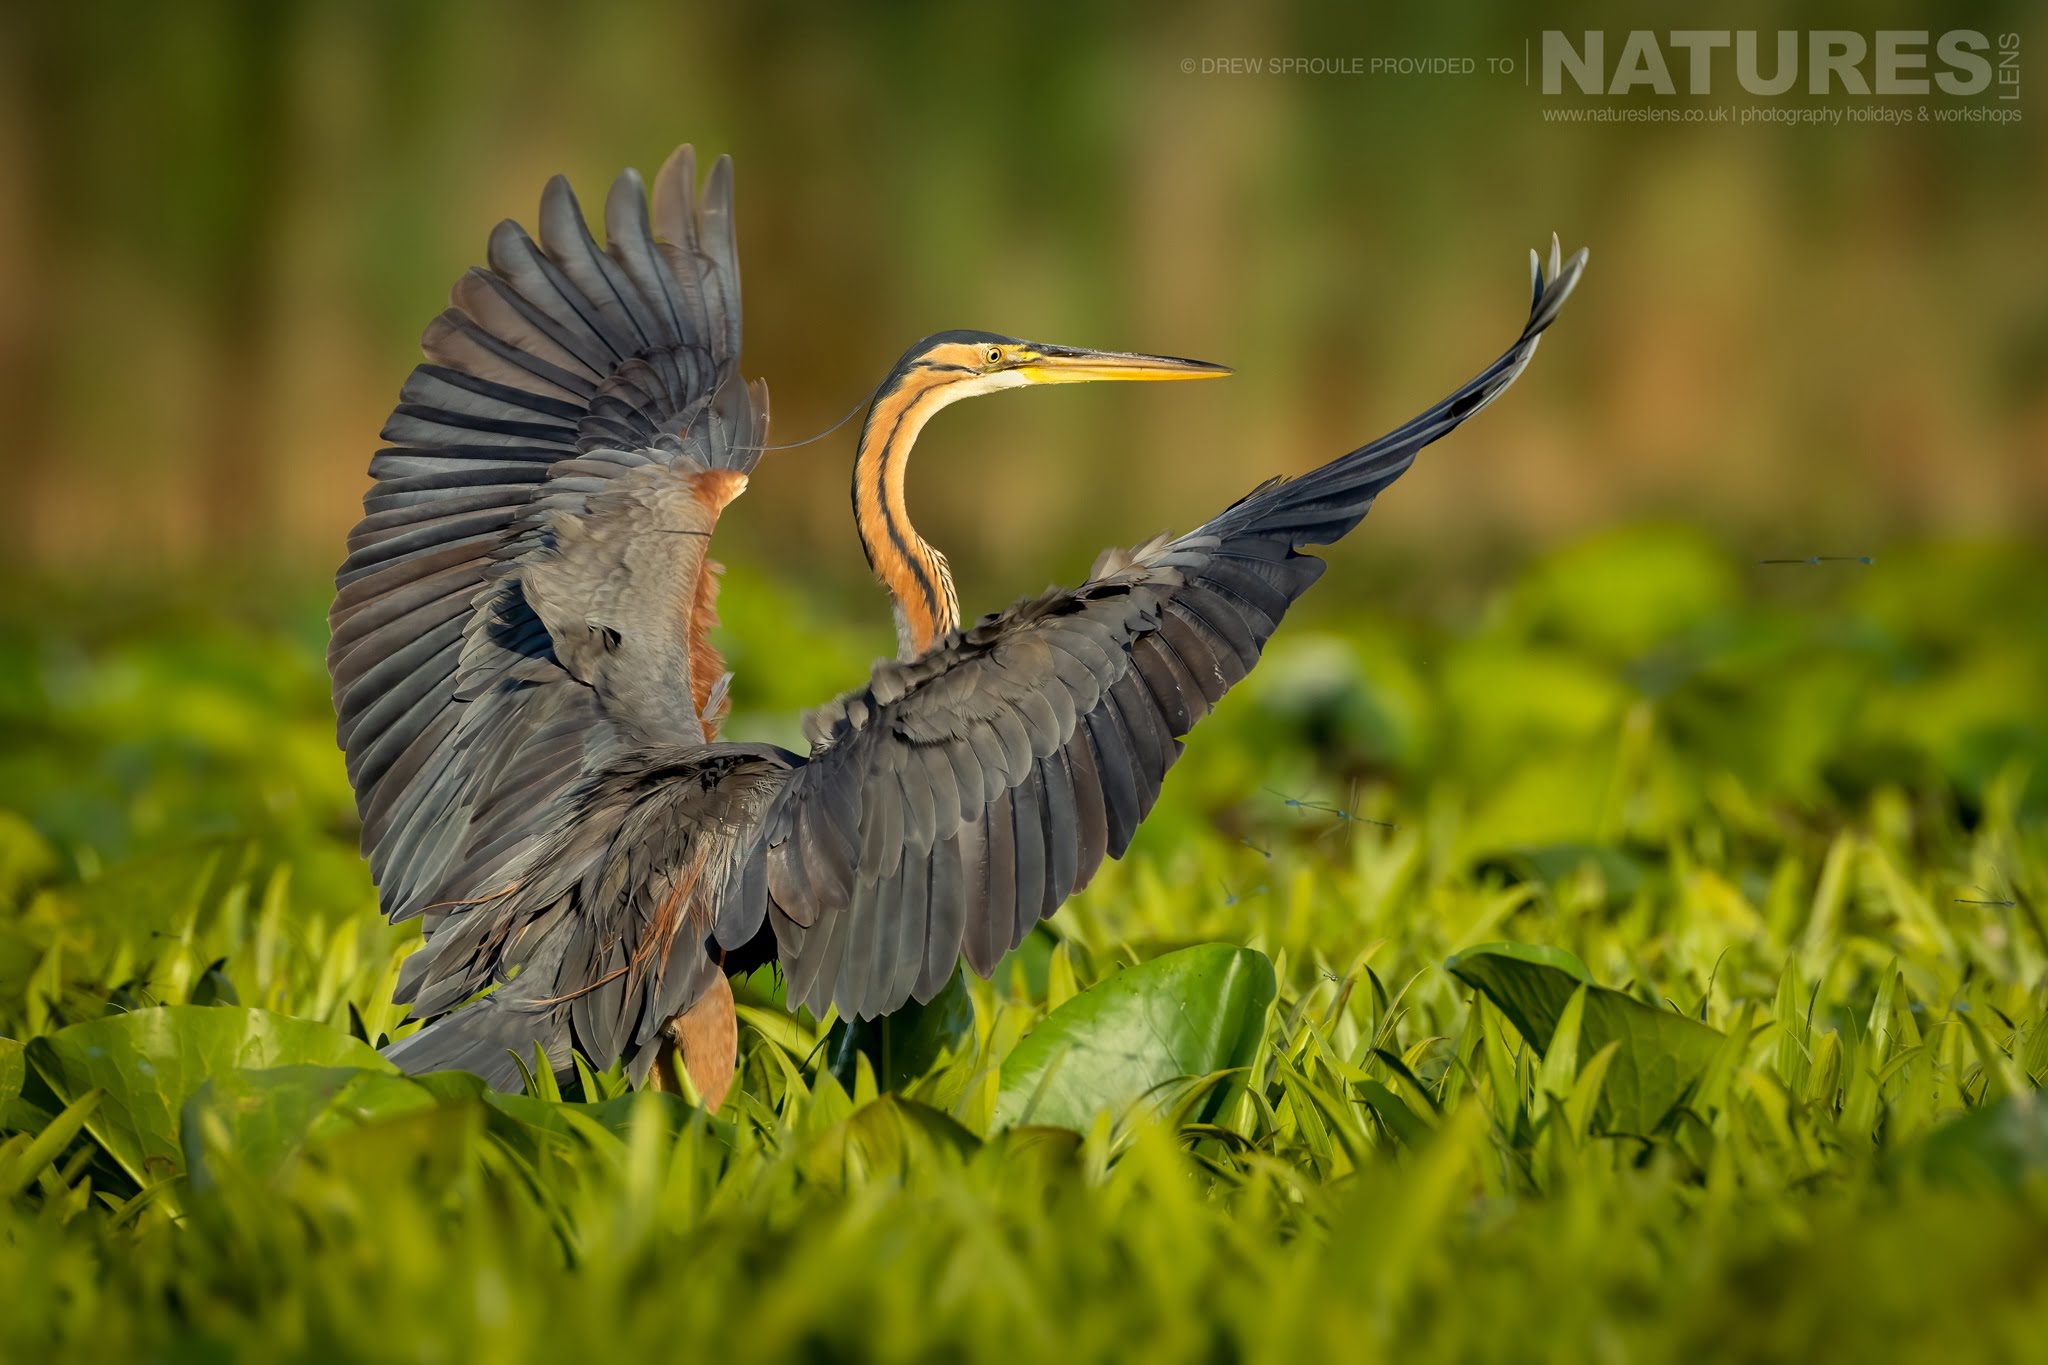 A Purple Heron Having Just Landed Typical Of The Kind Of Image You Will Capture During The Birdlife Of The Danube Delta Photography Trip